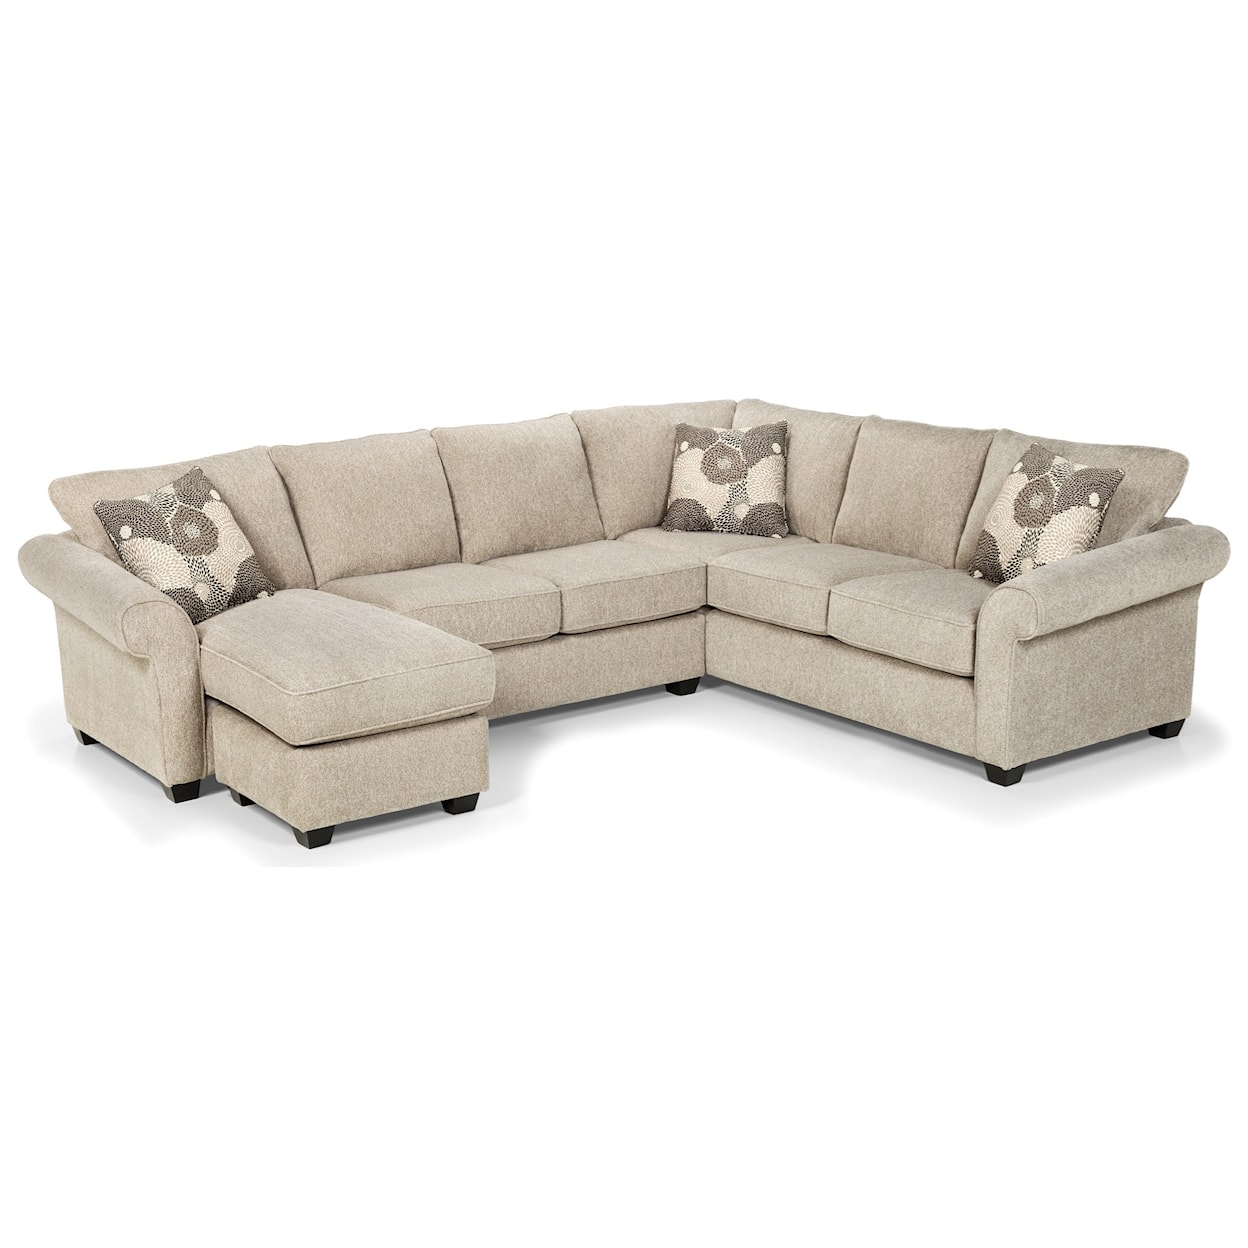 Sunset Home 464 5-Seat Sectional Sofa w/ LAF Chaise & Storag